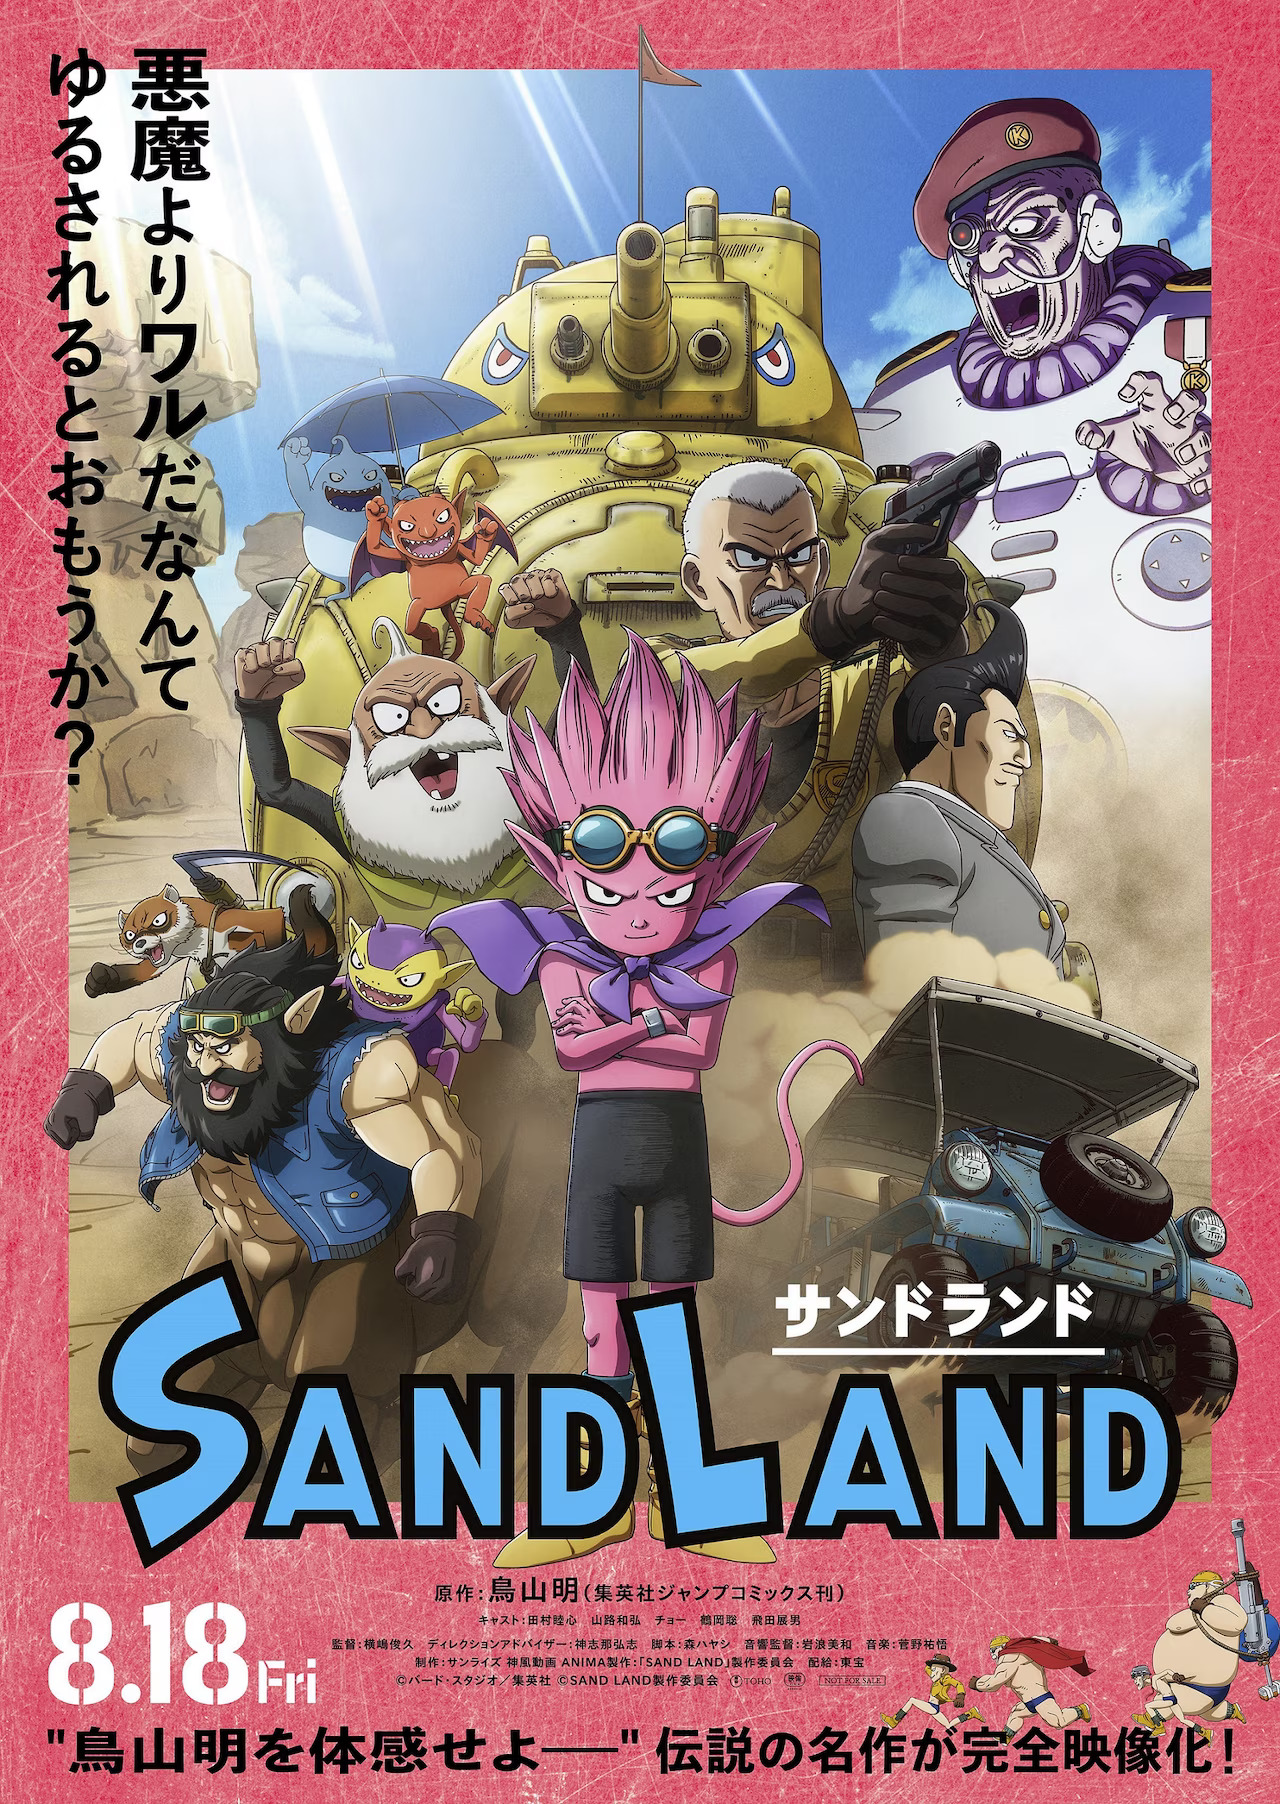 PV with Theme Song Revealed for August Movie Sand Land